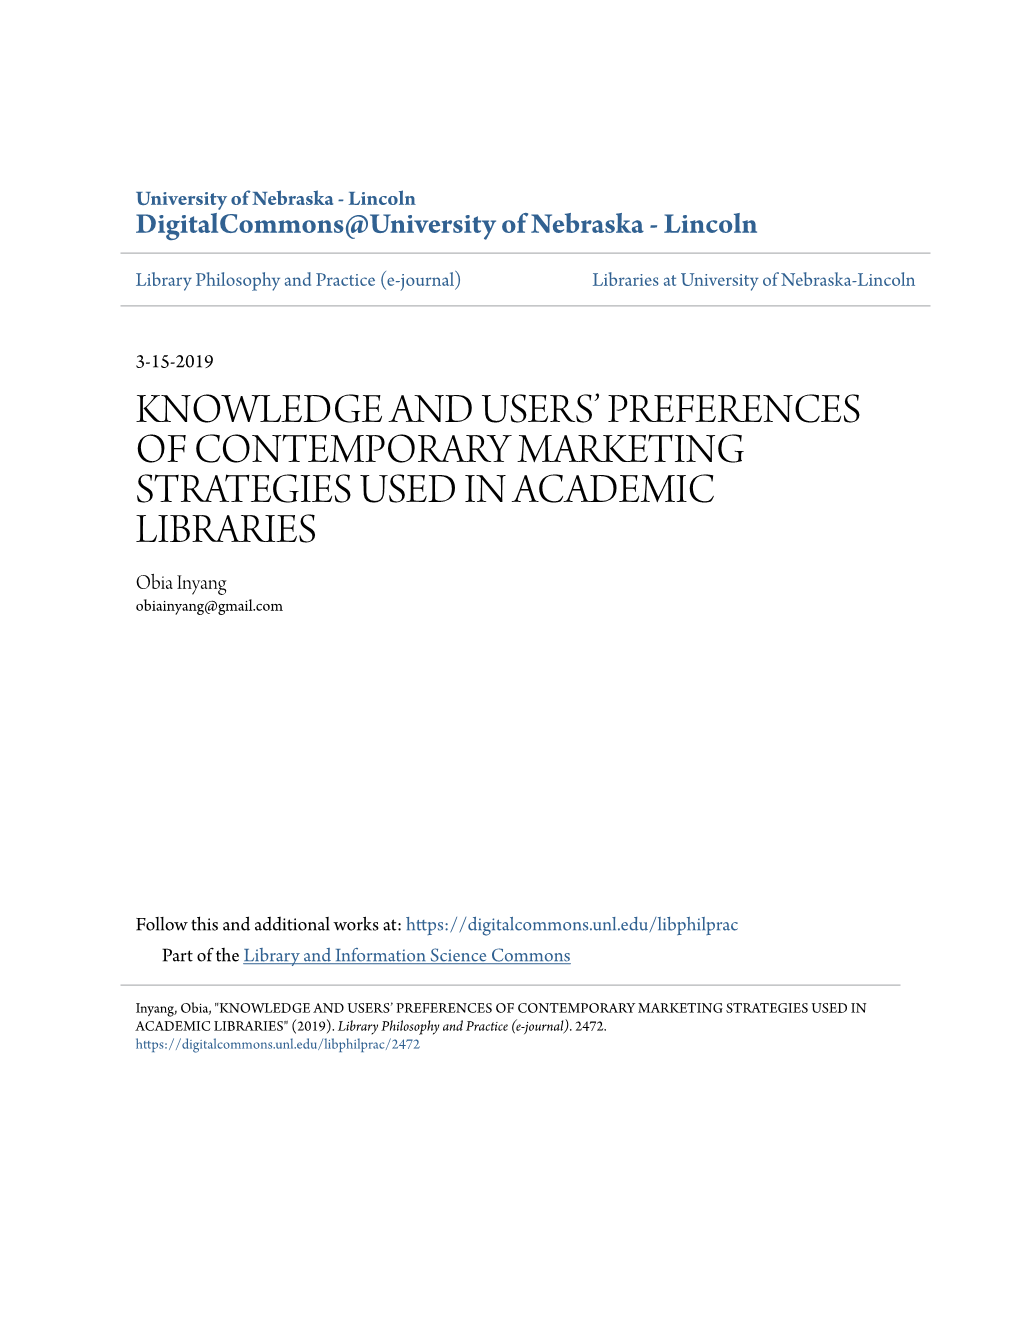 Knowledge and Users' Preferences Of